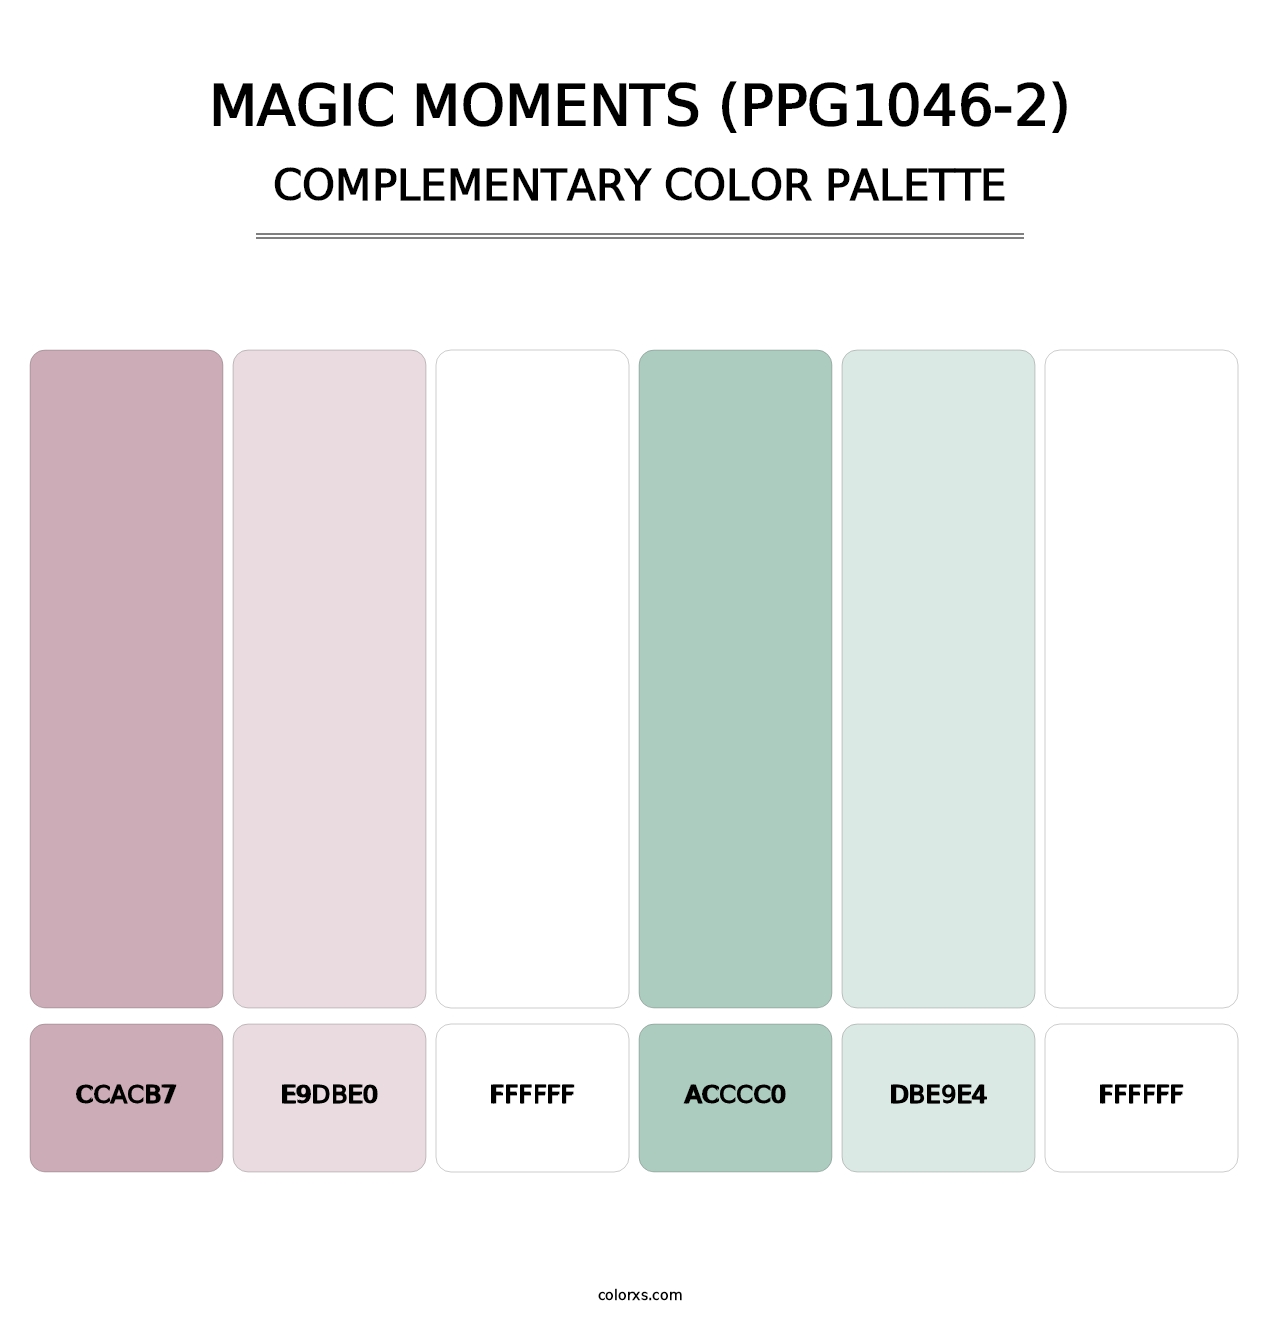 Magic Moments (PPG1046-2) - Complementary Color Palette